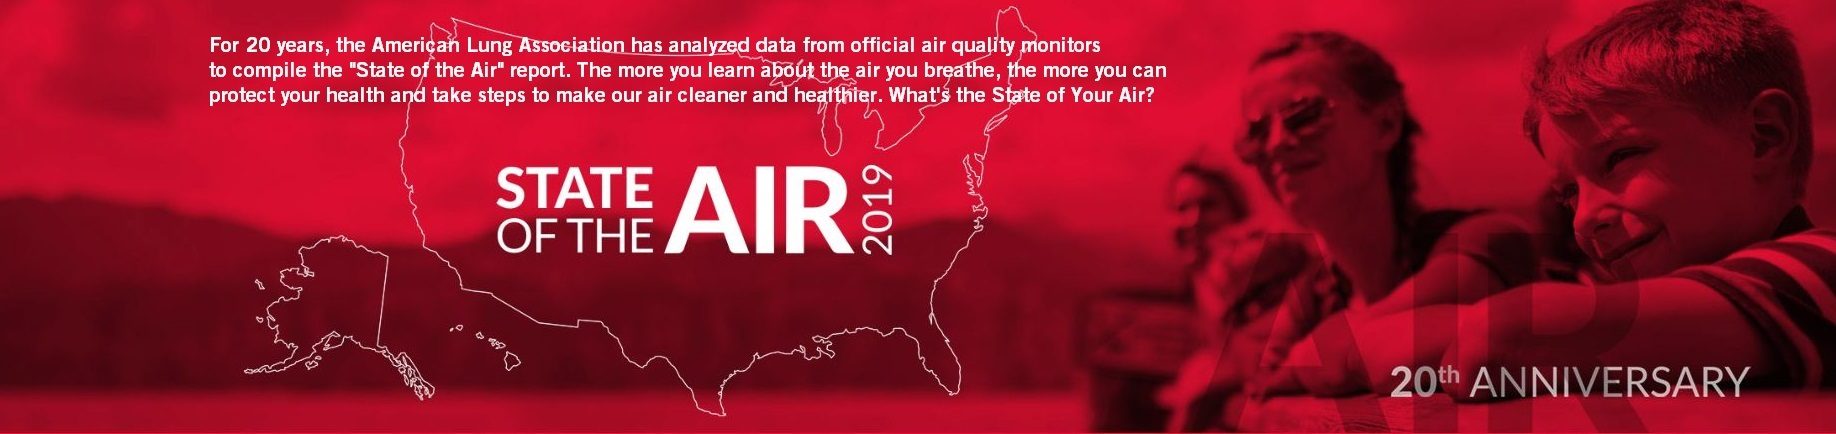 The Air Outside Your Door – New Report Gives Letter Grades for Community Air Quality